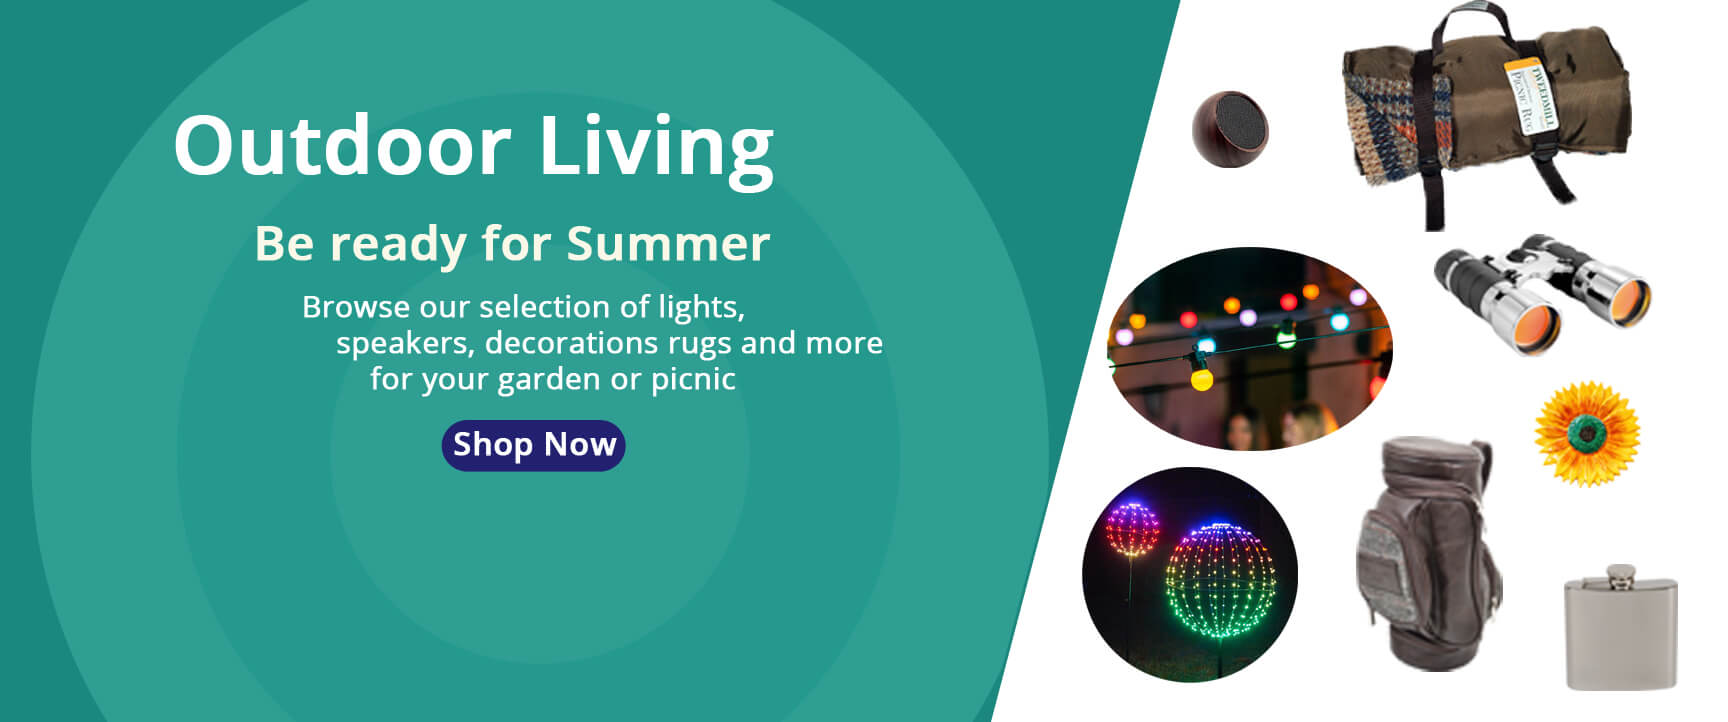 Get ready for Summer with our selection of picnic rugs garden lights and decorations speakers and much more